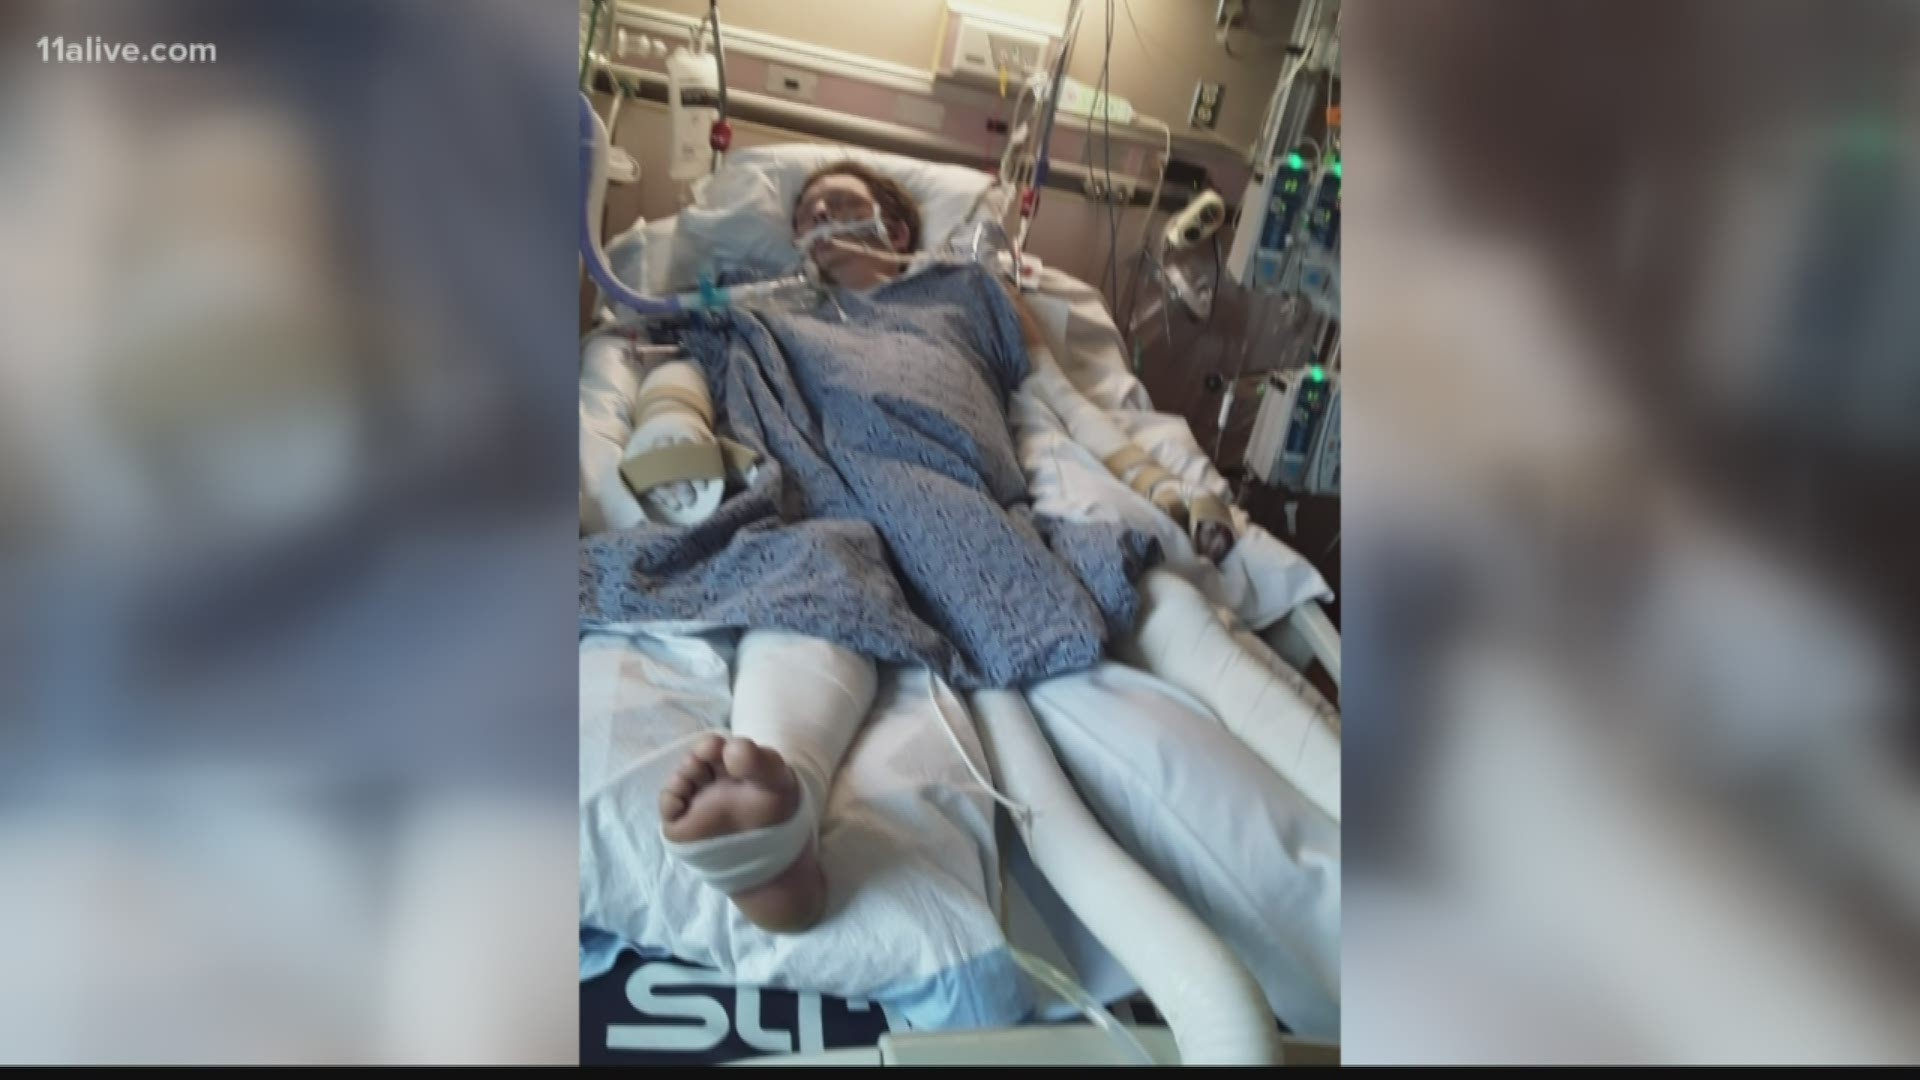 A terrifying work accident left a Milton man with burns on 60 percent of his body last week.